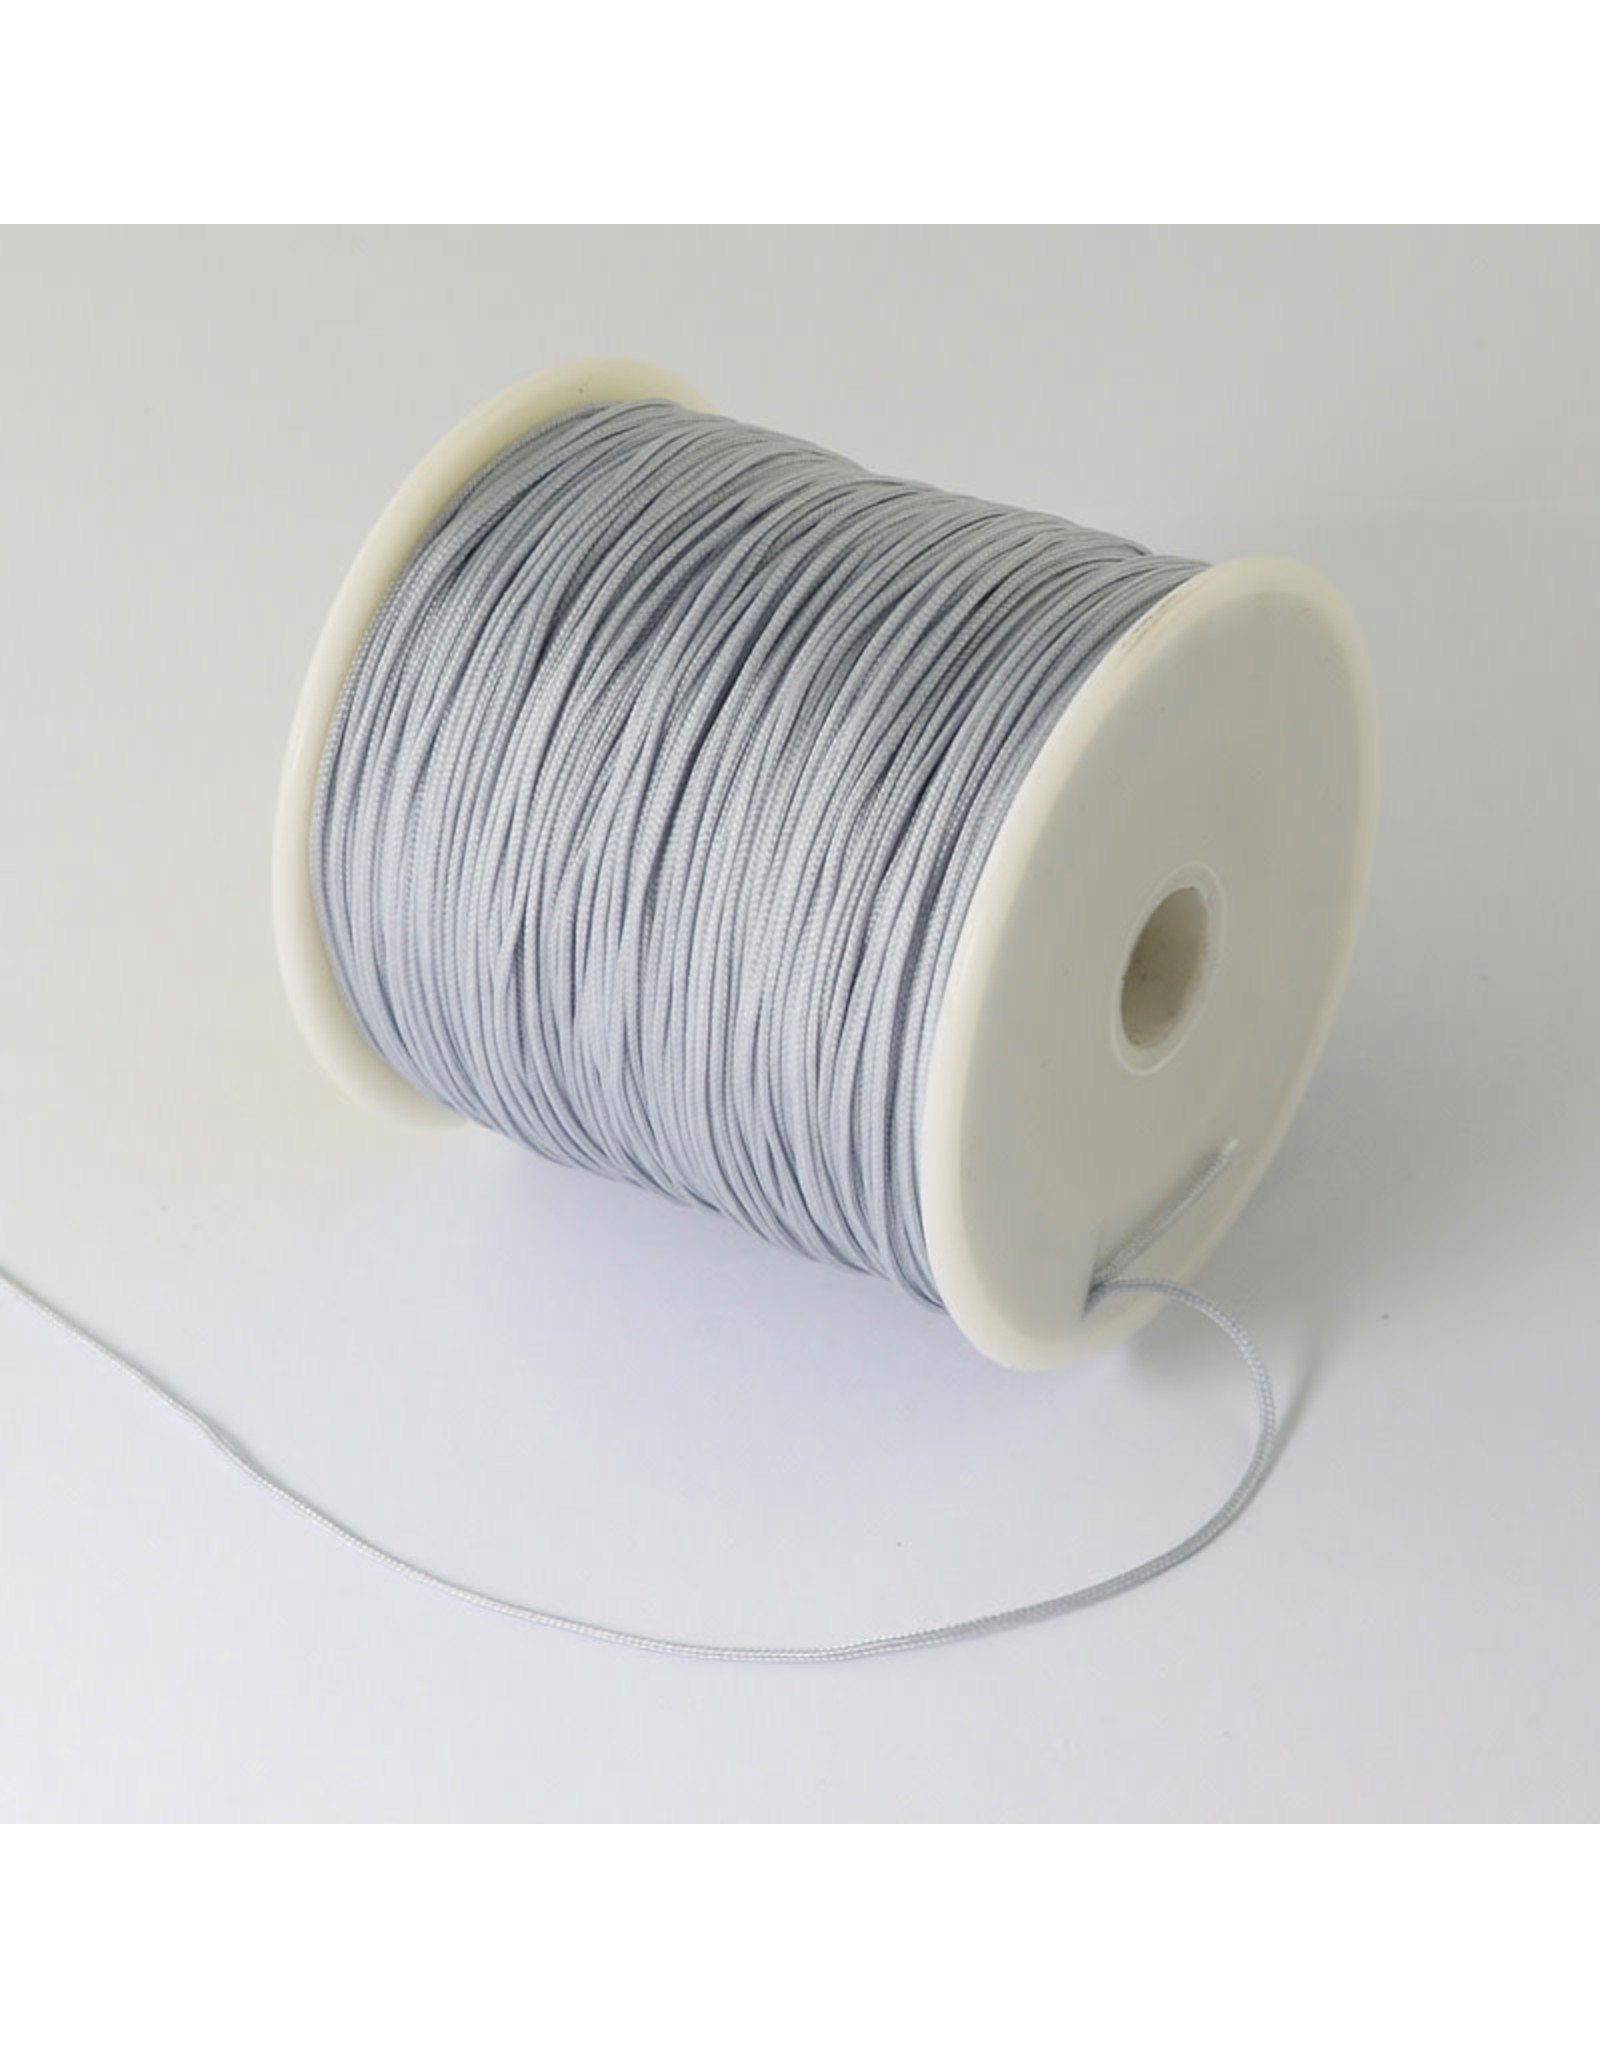 Chinese Knotting Cord .8mm Light Grey x100y